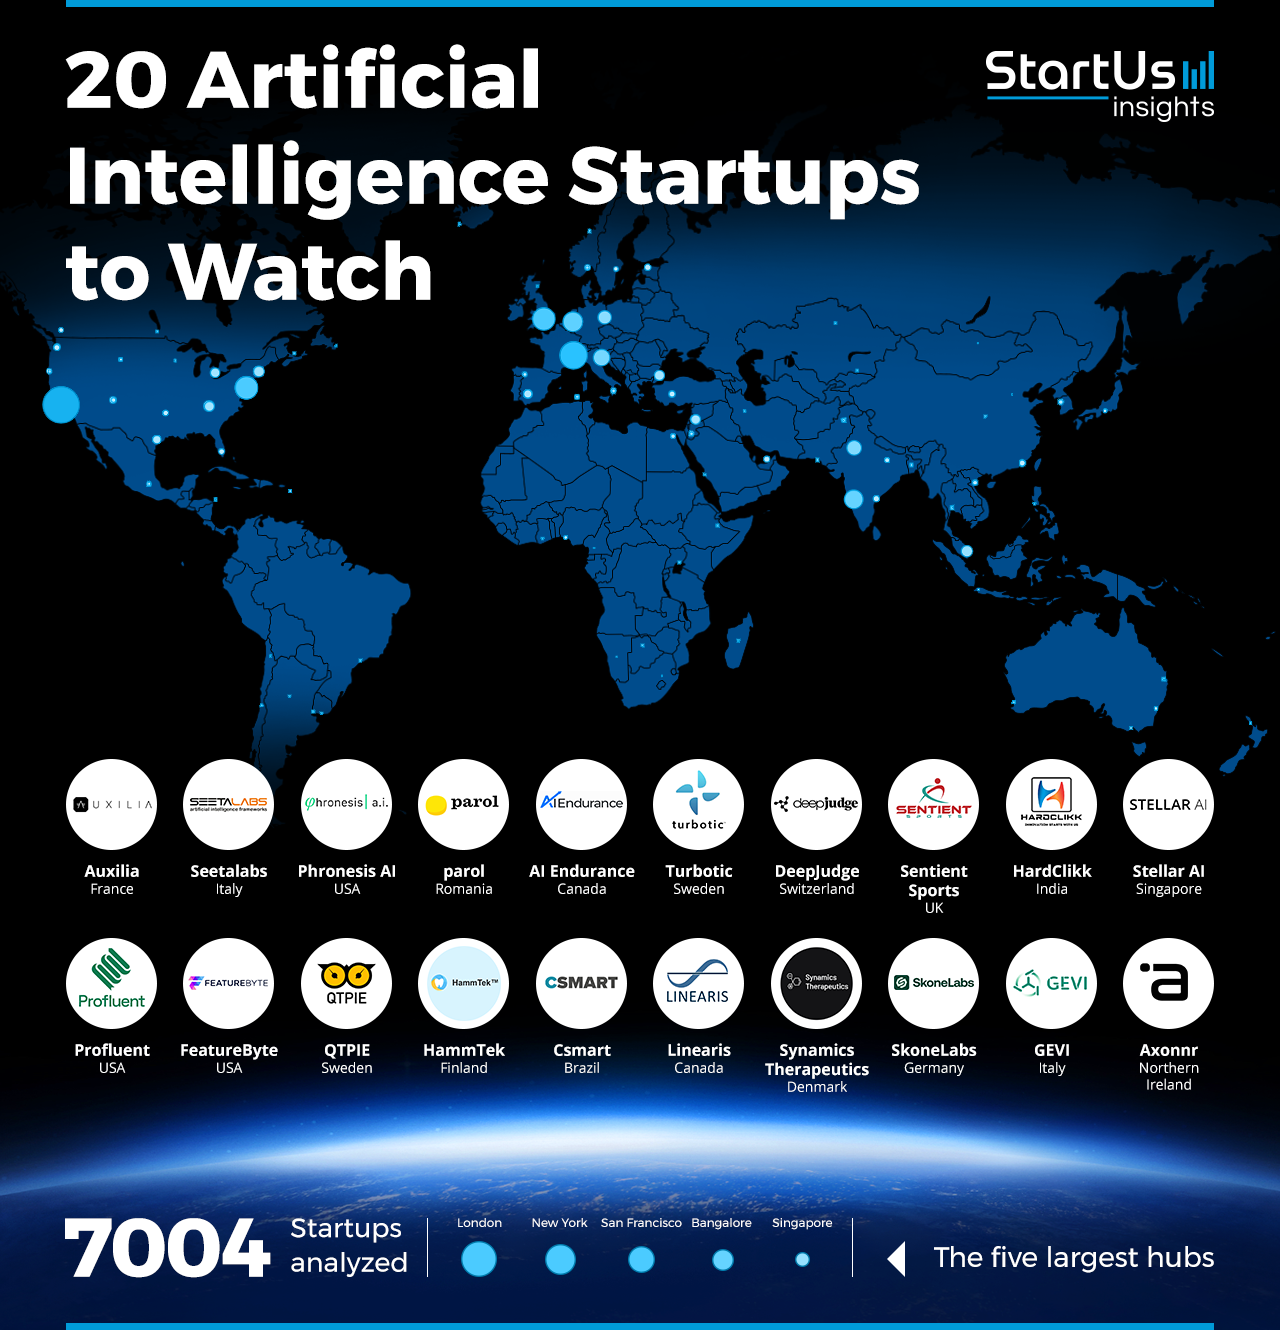 Artificial-Intelligence-Startups-to-Watch-Heat-Map-StartUs-Insights-noresize